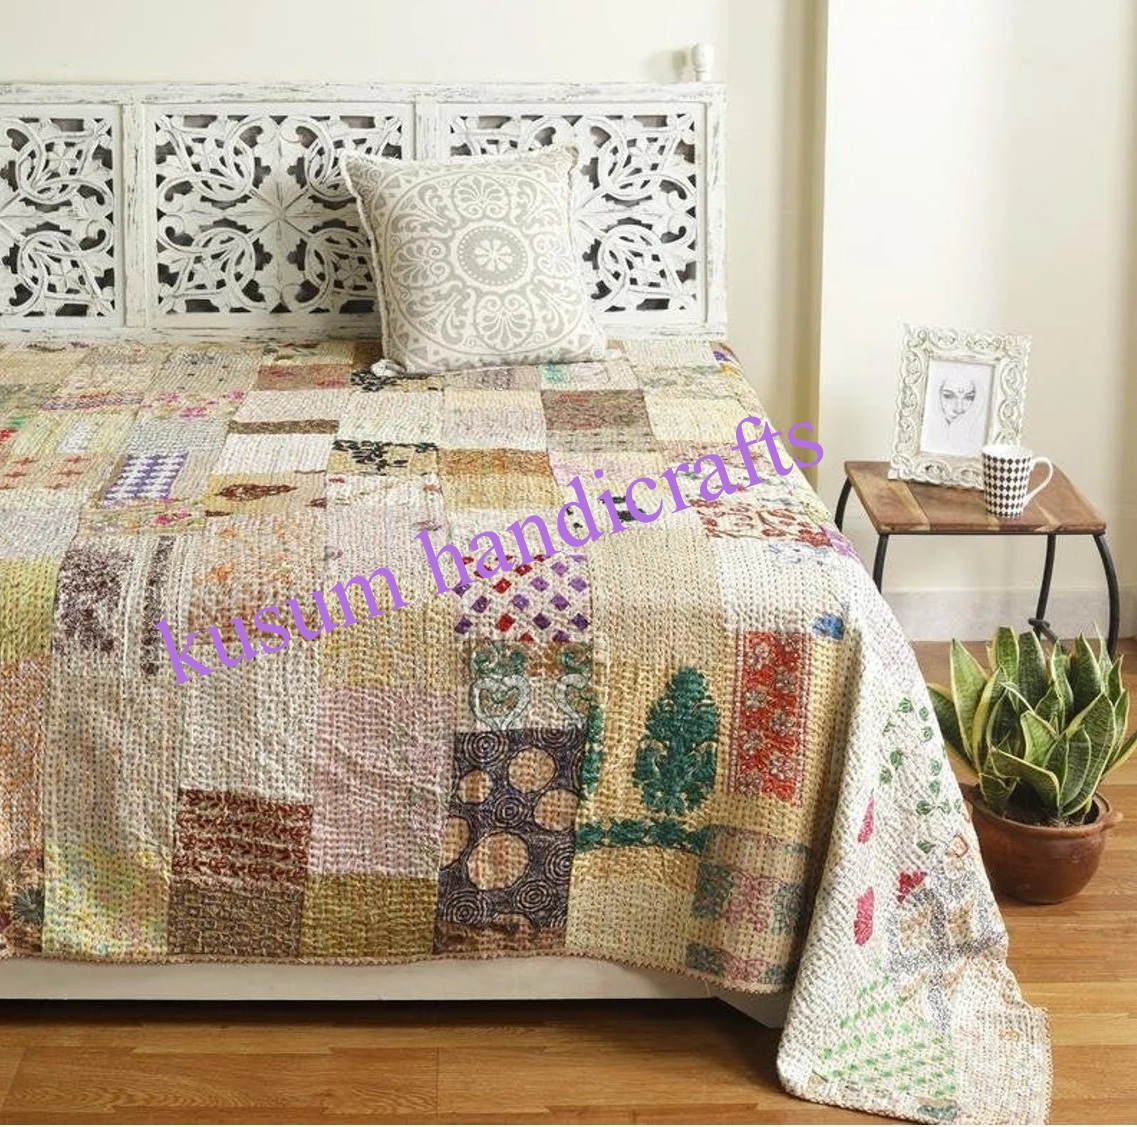 White Twin Kantha Quilt Fruit Print Bedspread Bed Cover Kantha Rallies 60"x 90" 